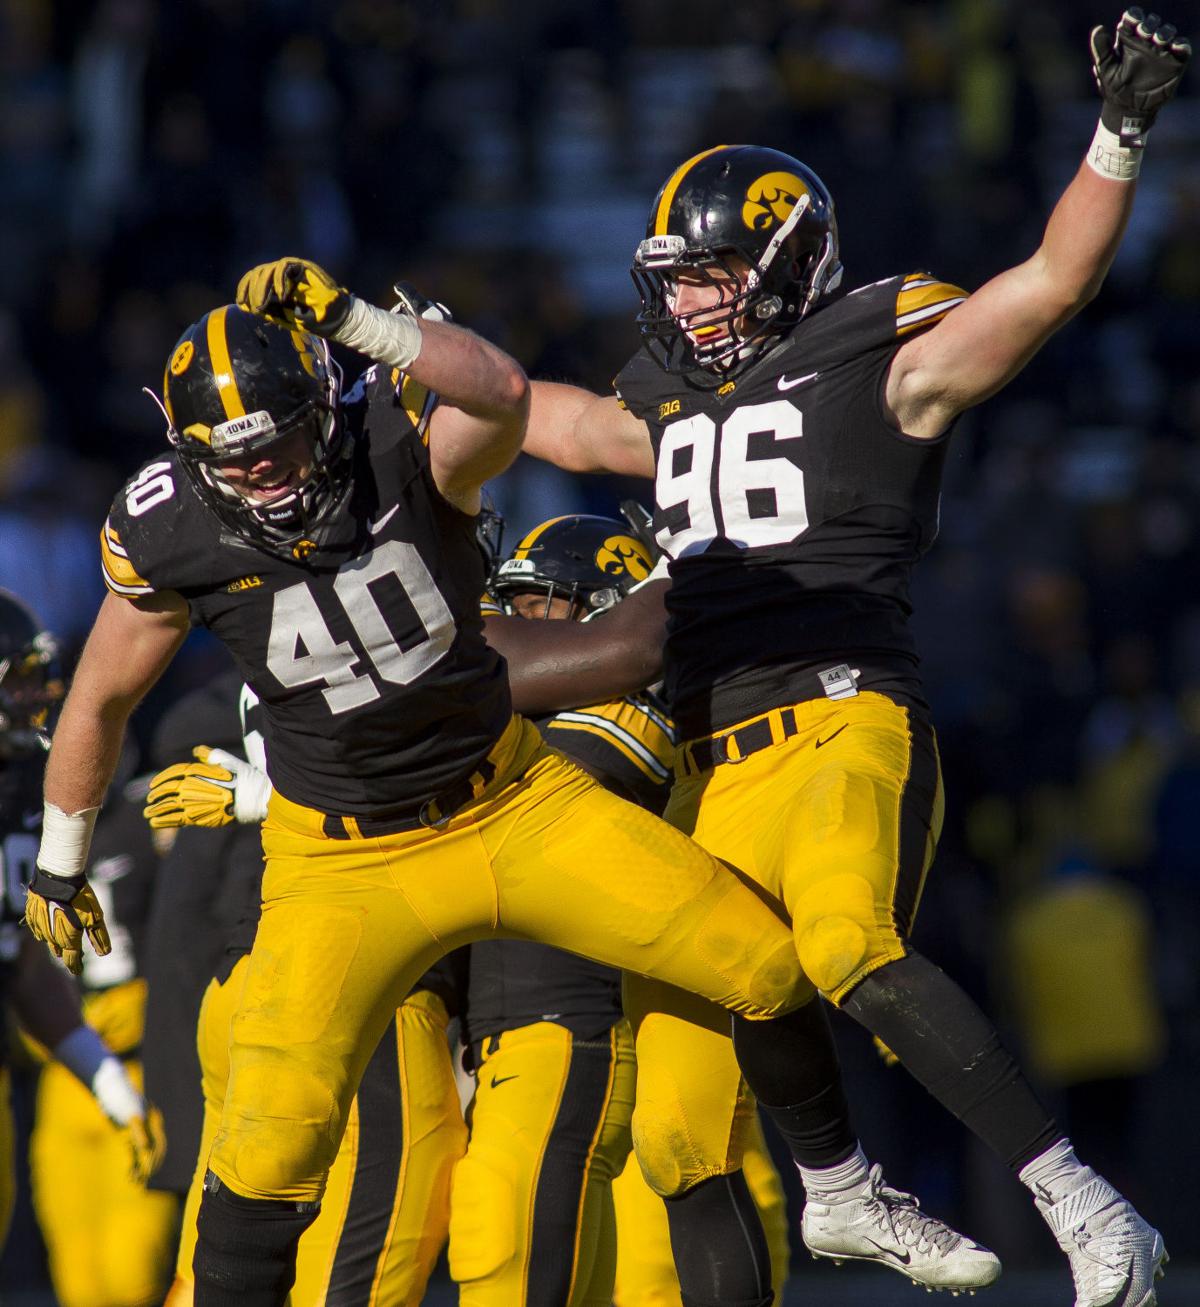 Hawkeyes, Huskers both get what they want in Heroes match up | Iowa ...